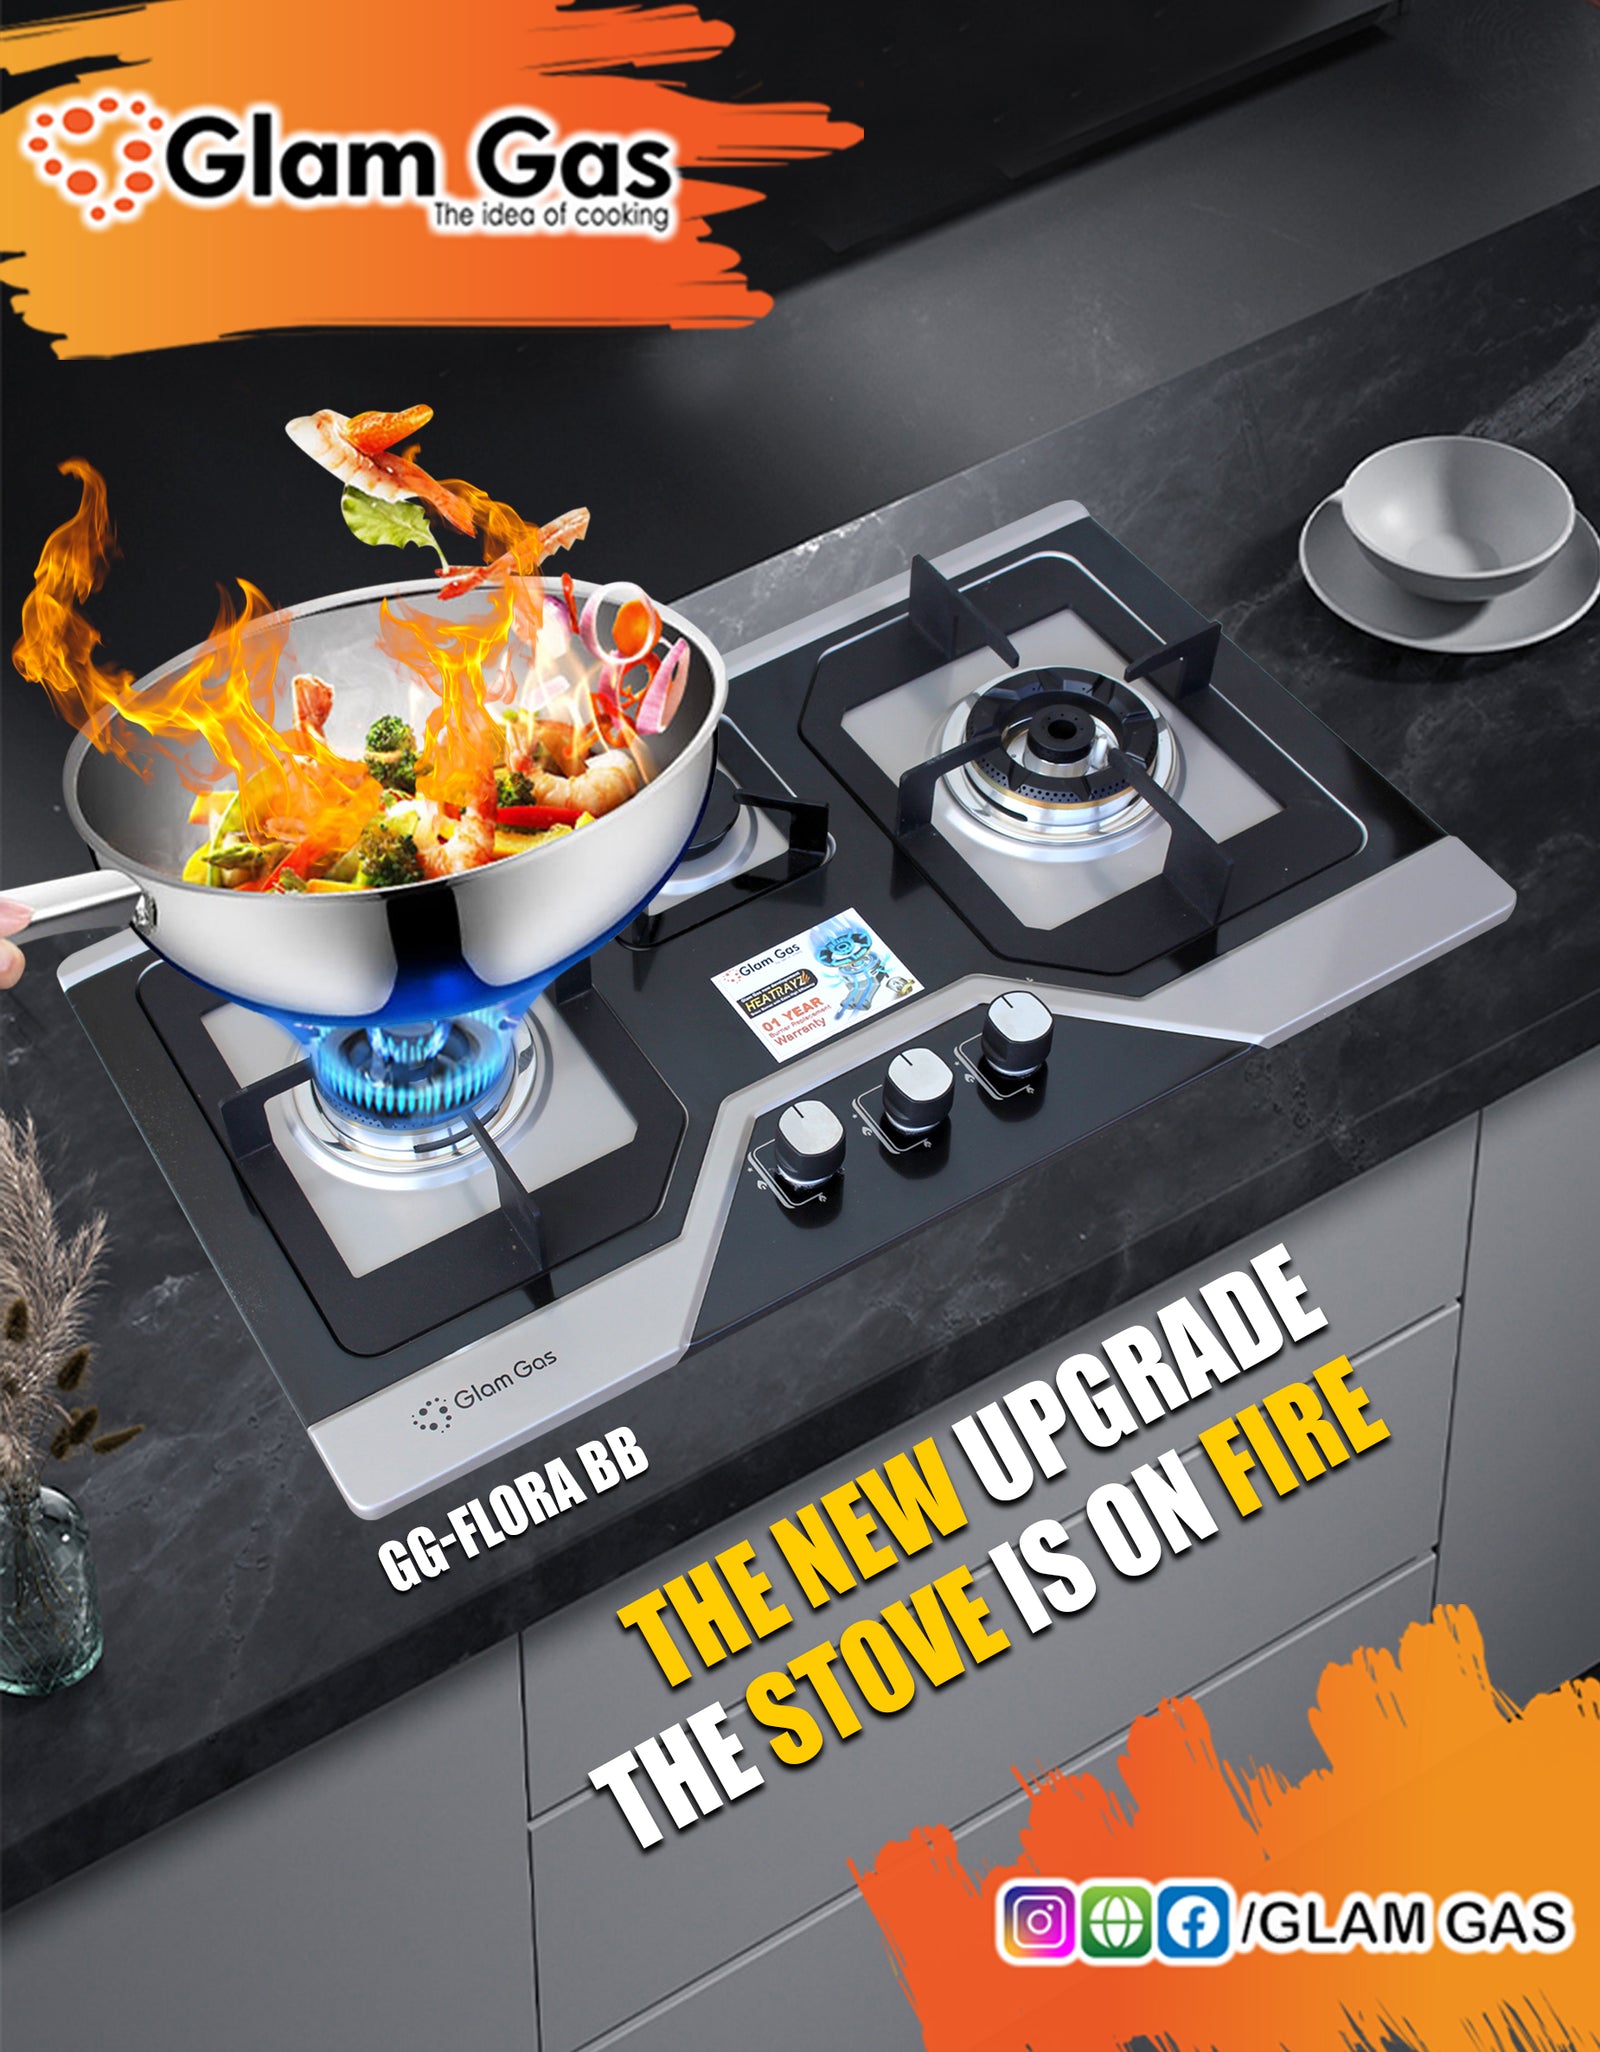 Glamgas-Flora B-gas cooking burner its flexible Price Online Shop Now 